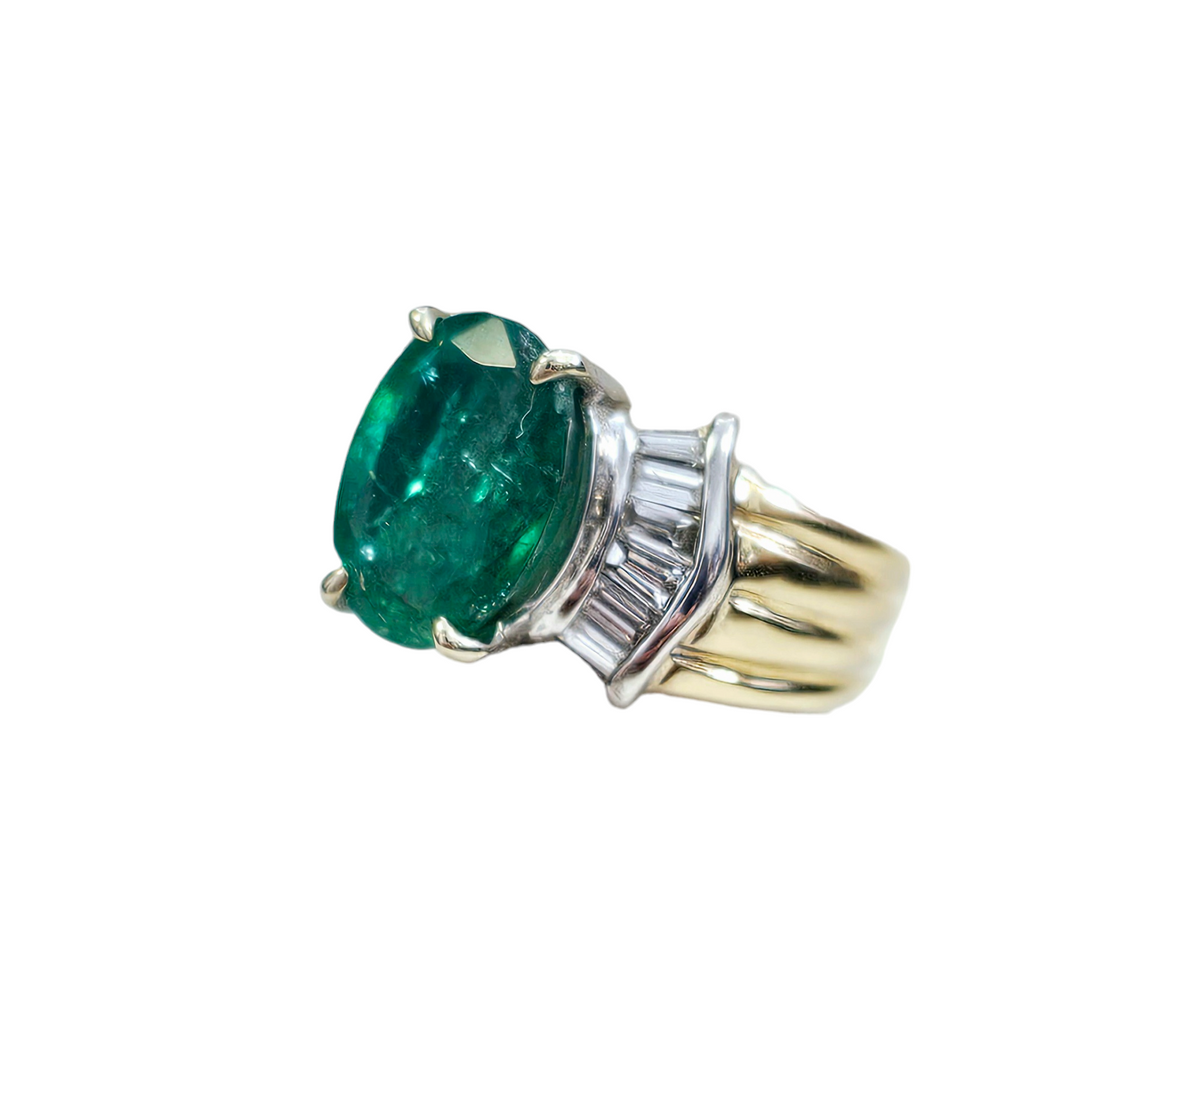 Oval-Cut Emerald and Bow Tie Style Baguette Cut Diamond Ring made in 14-Karat Yellow and White Gold